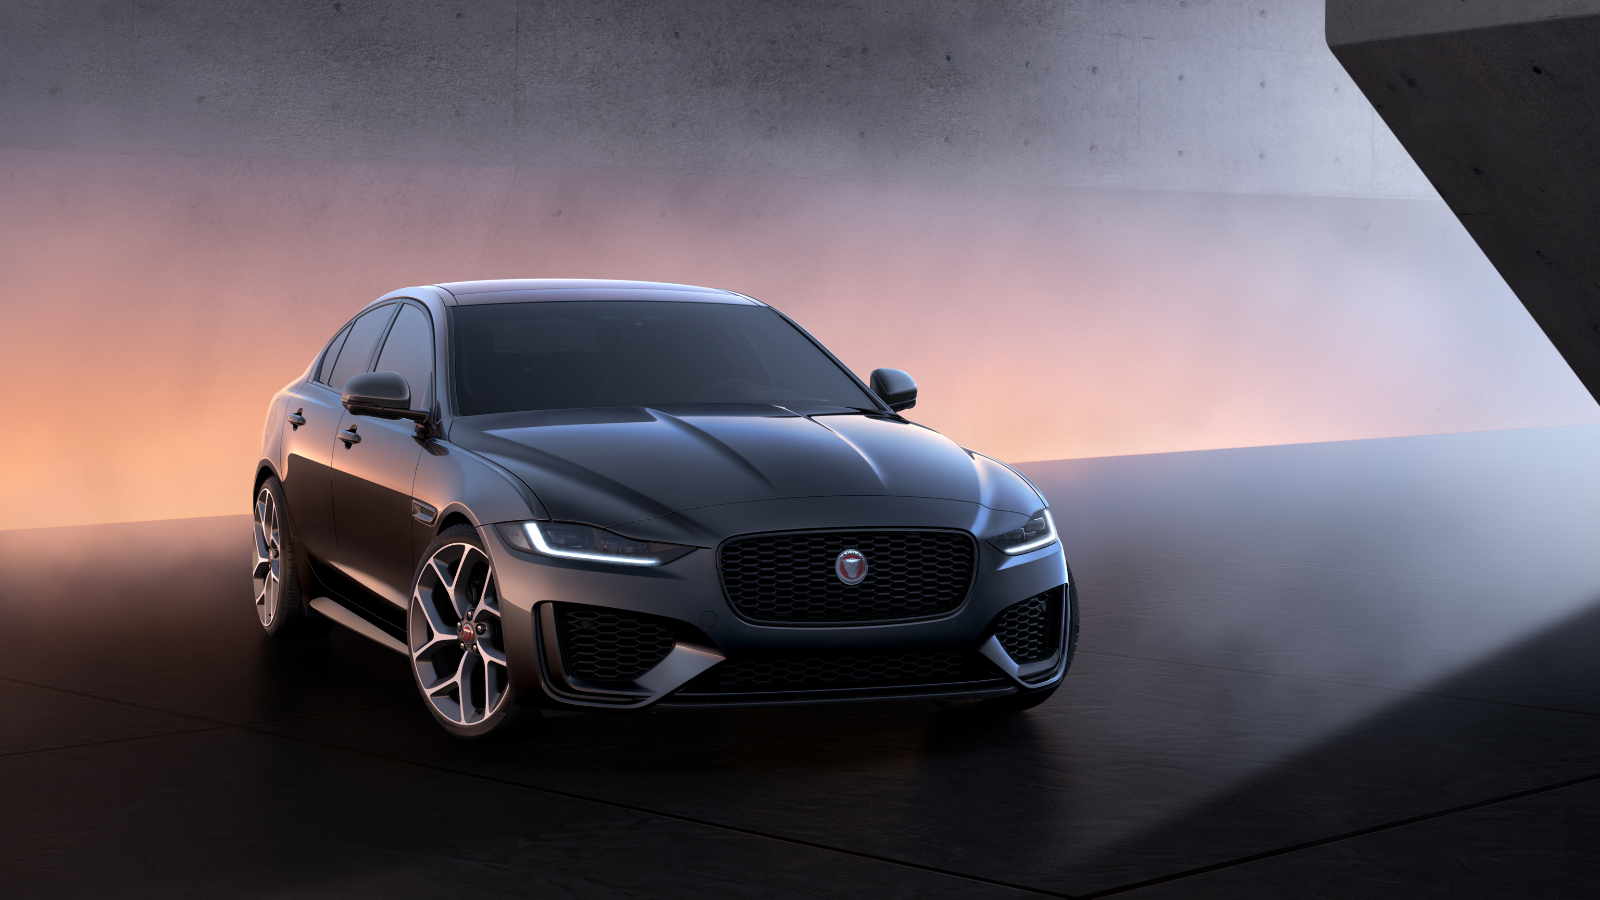 JAGUAR XE AND XF NOW WITH 300 SPORT MODELS AND AMAZON ALEXA ACROSS THE RANGE